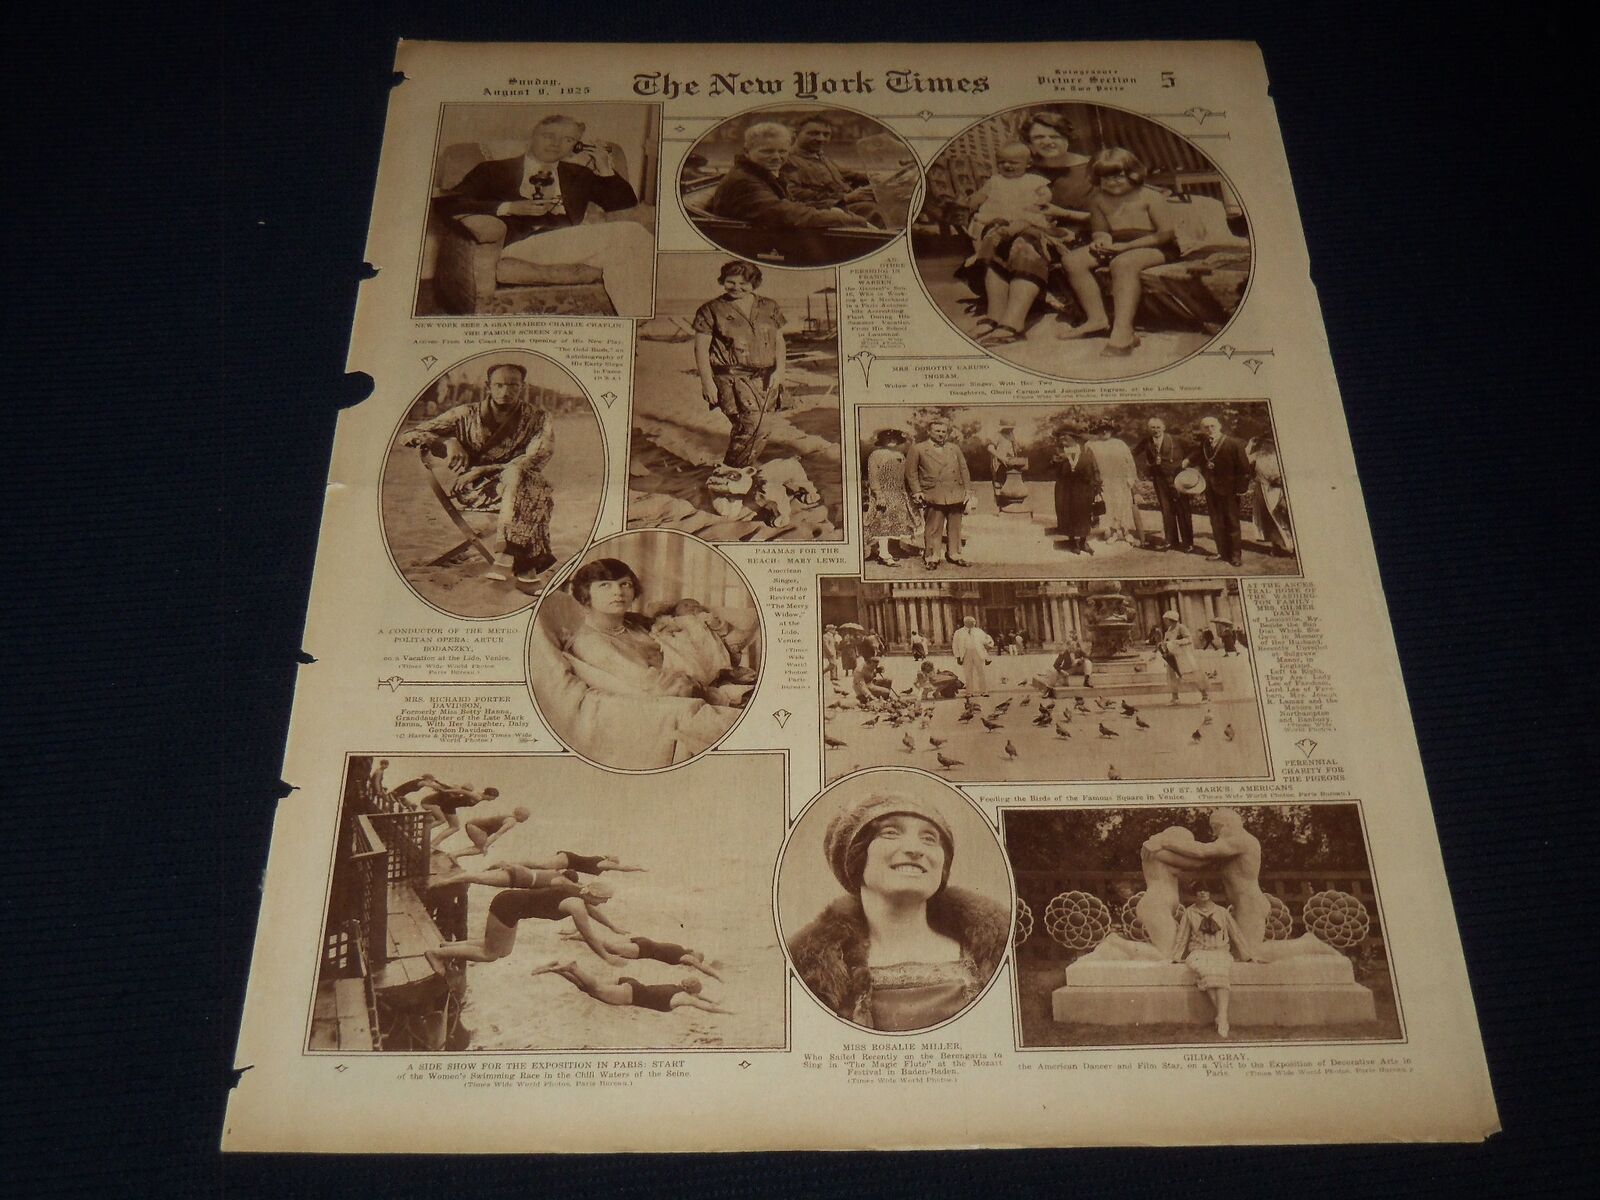 1925 AUGUST 9 NEW YORK TIMES PICTURE SECTION - CHARLIE CHAPLIN - NT 9486